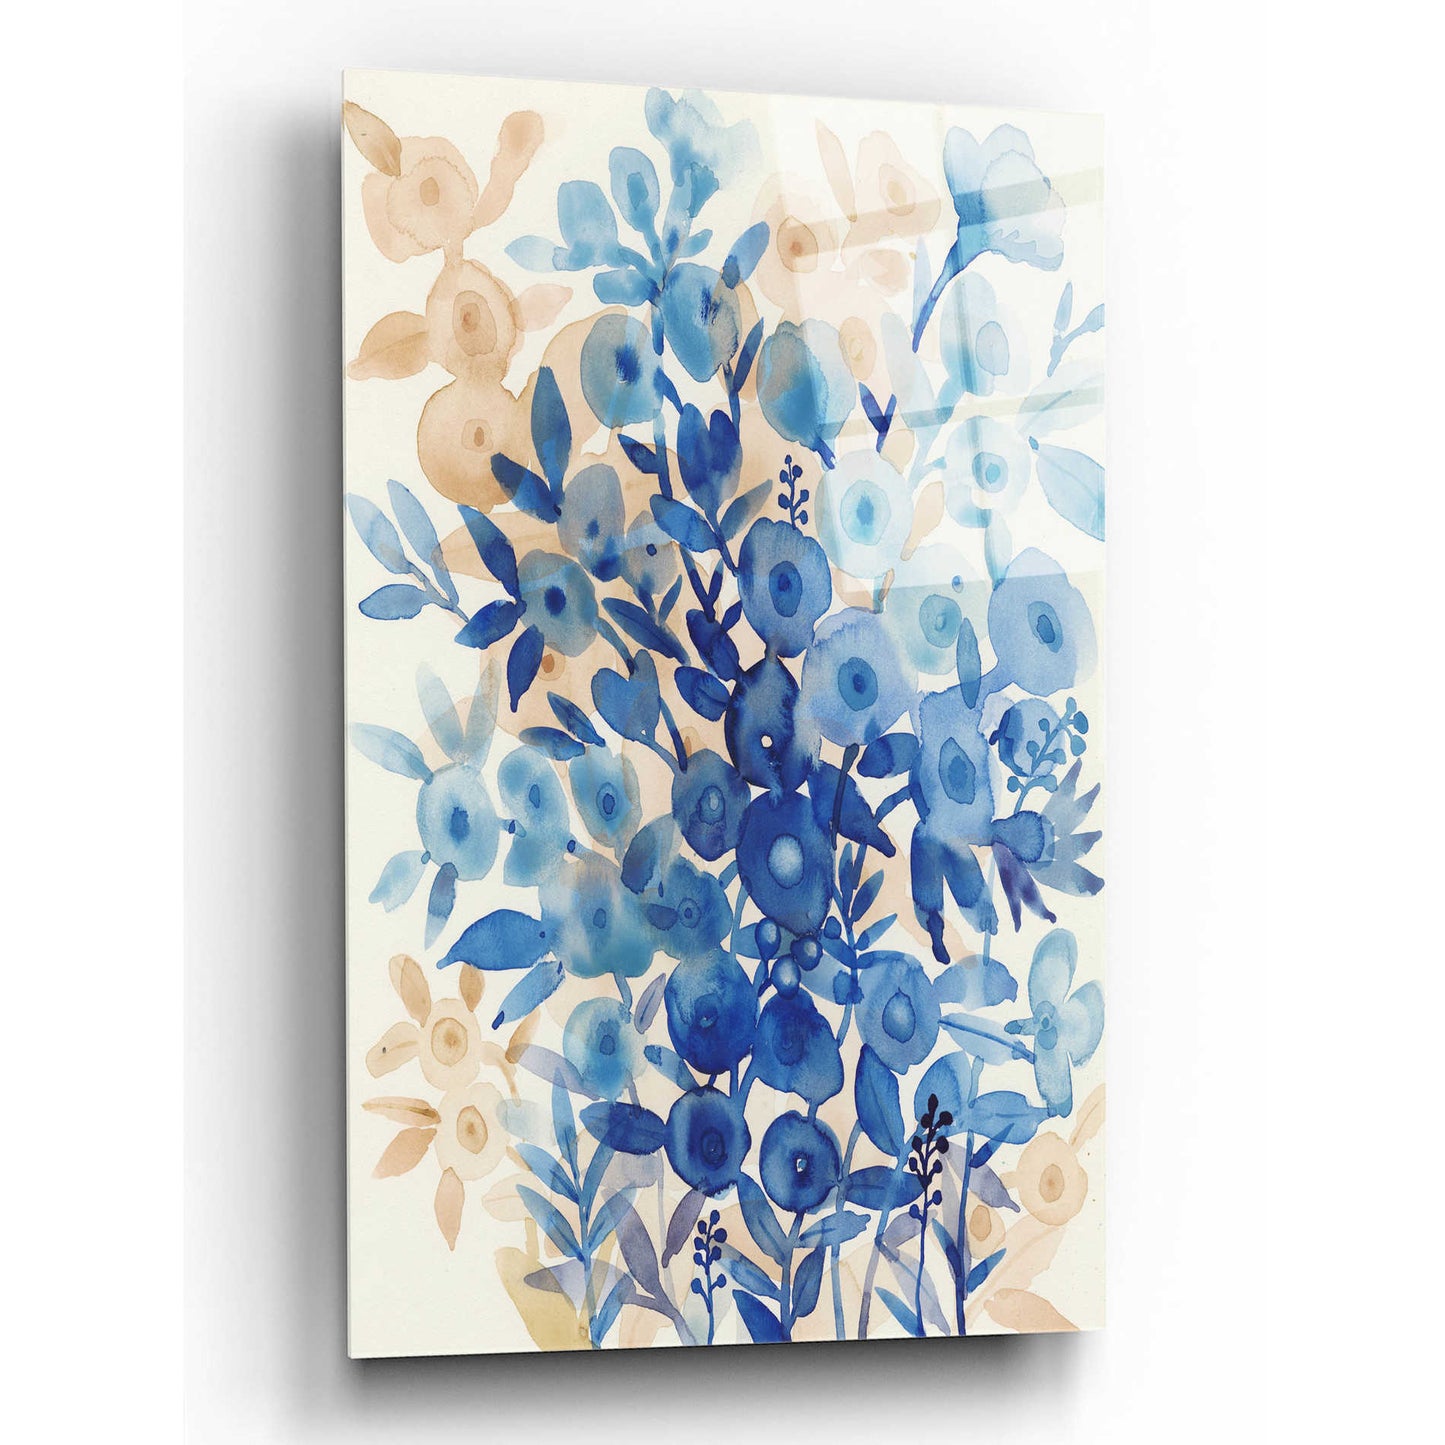 Epic Art 'Blueberry Floral II' by Tim O'Toole, Acrylic Glass Wall Art,12x16